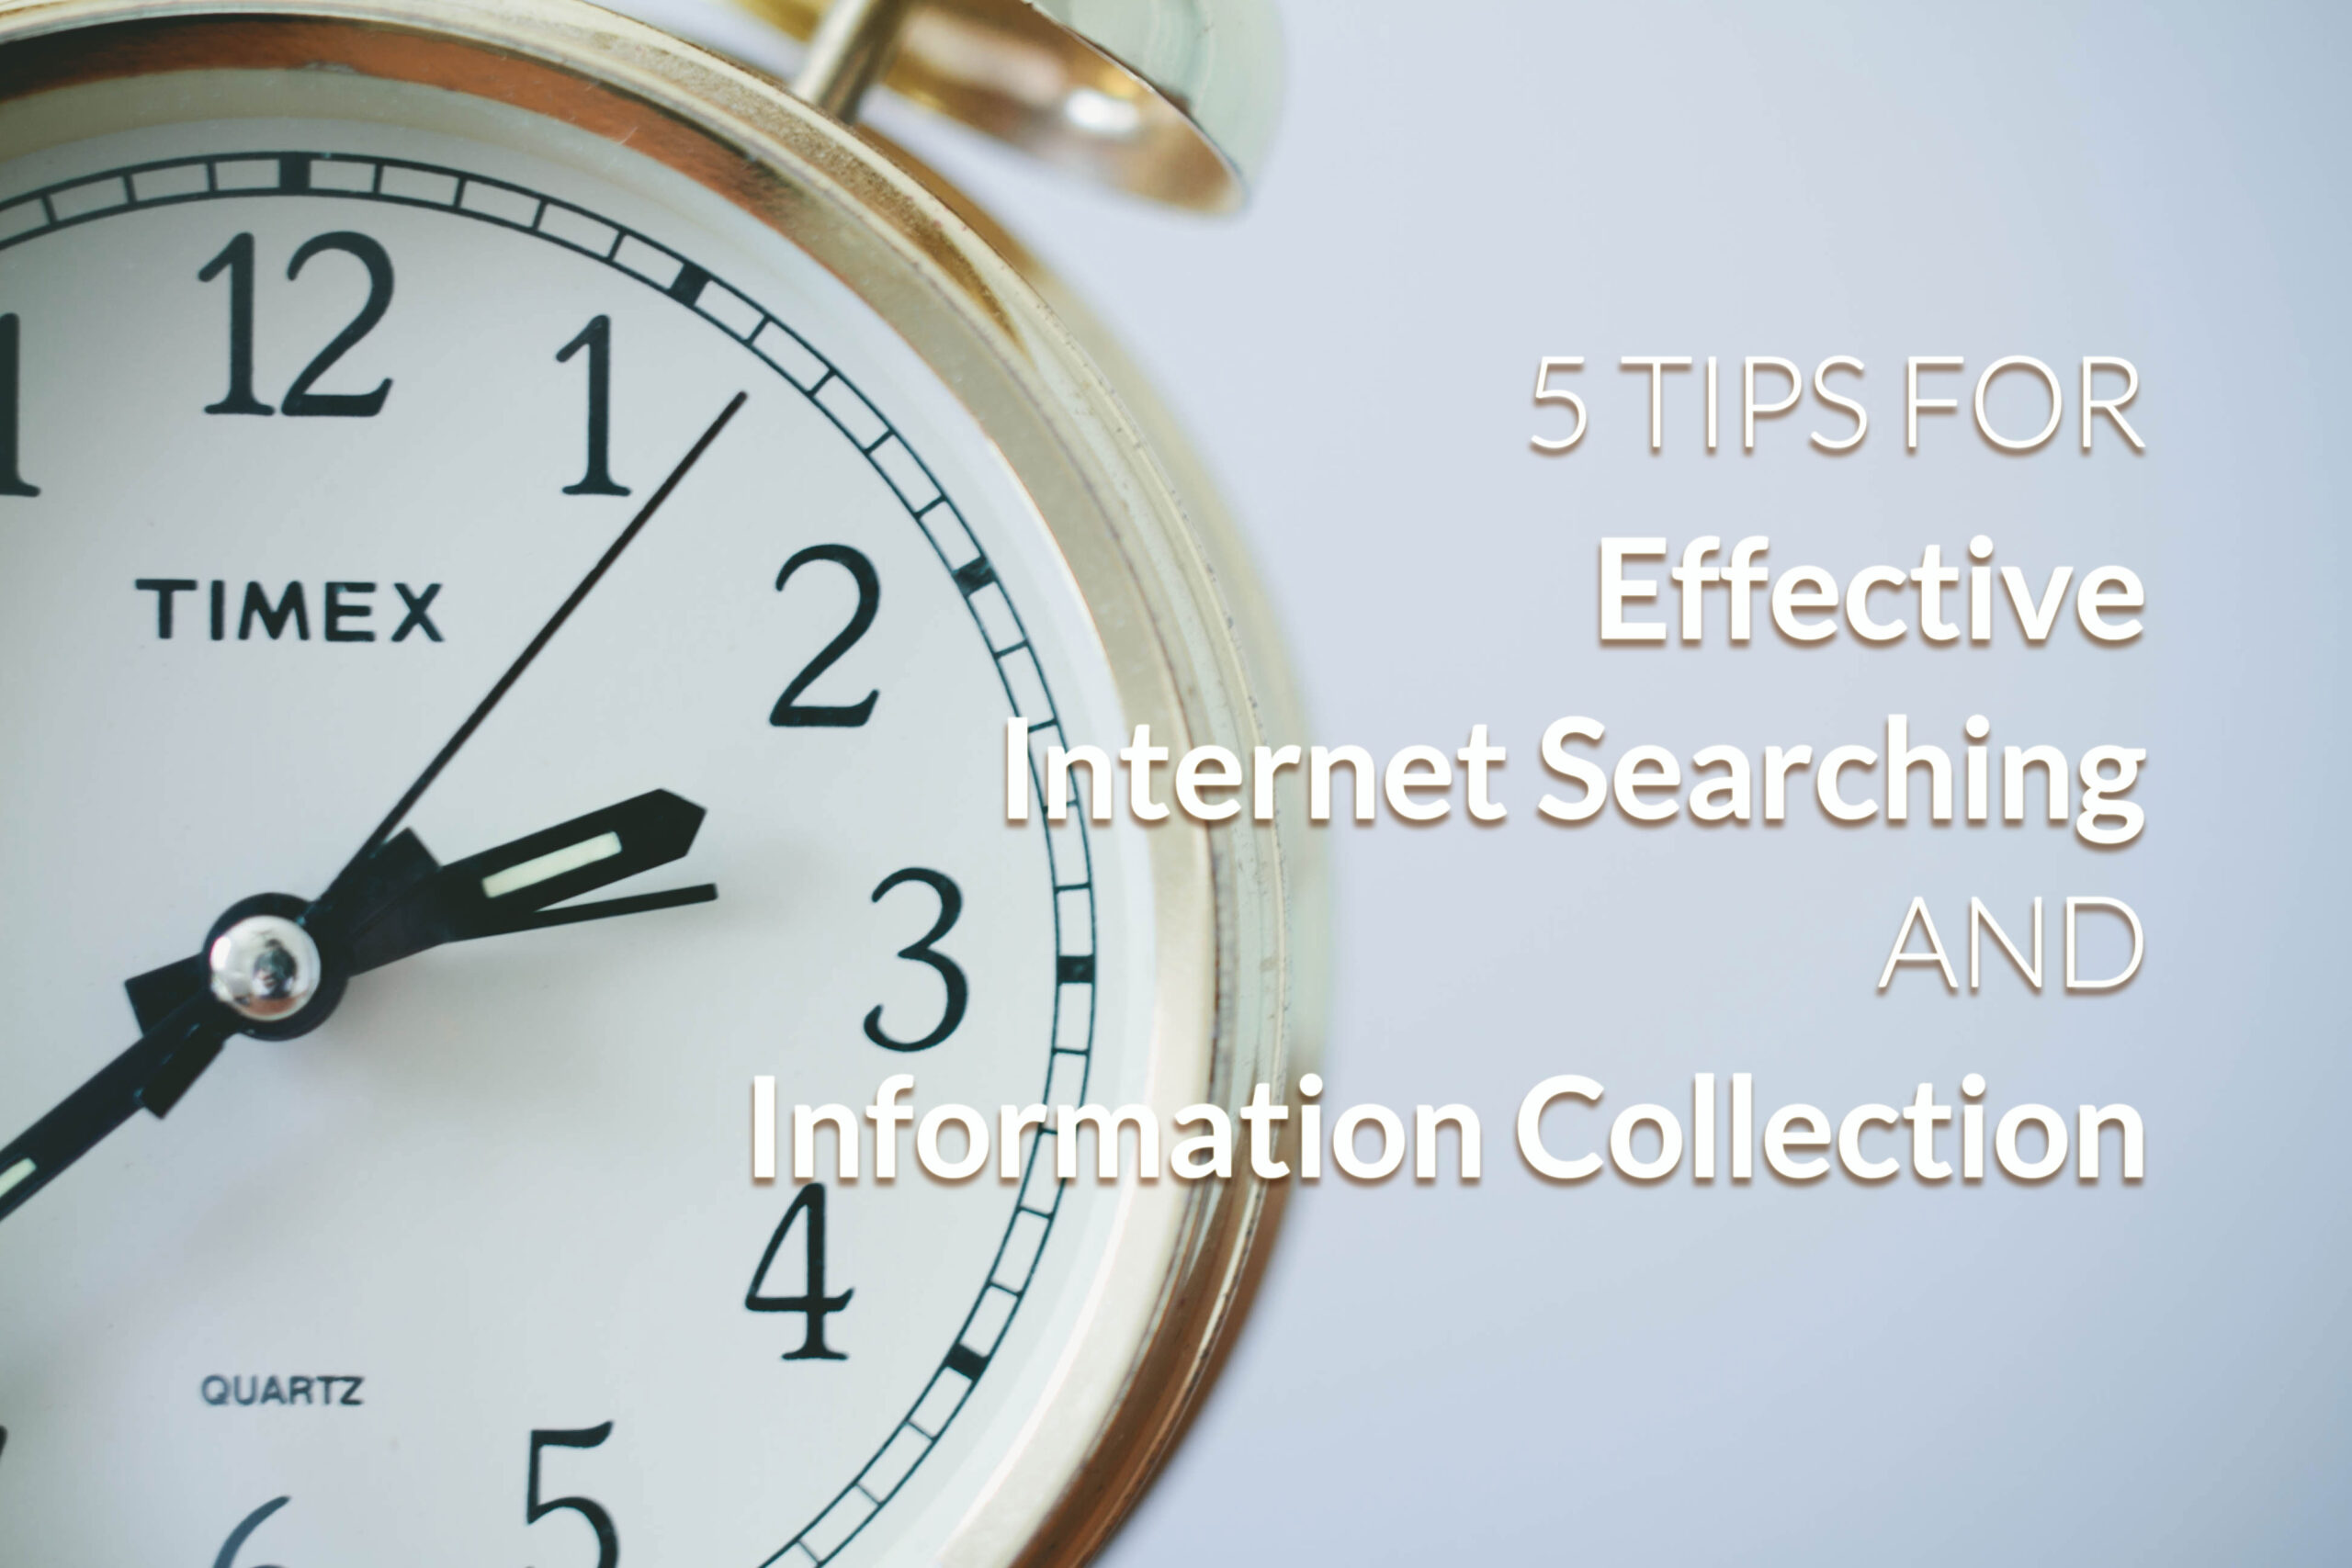 5 Tips for Effective Internet Searching & Information Collection